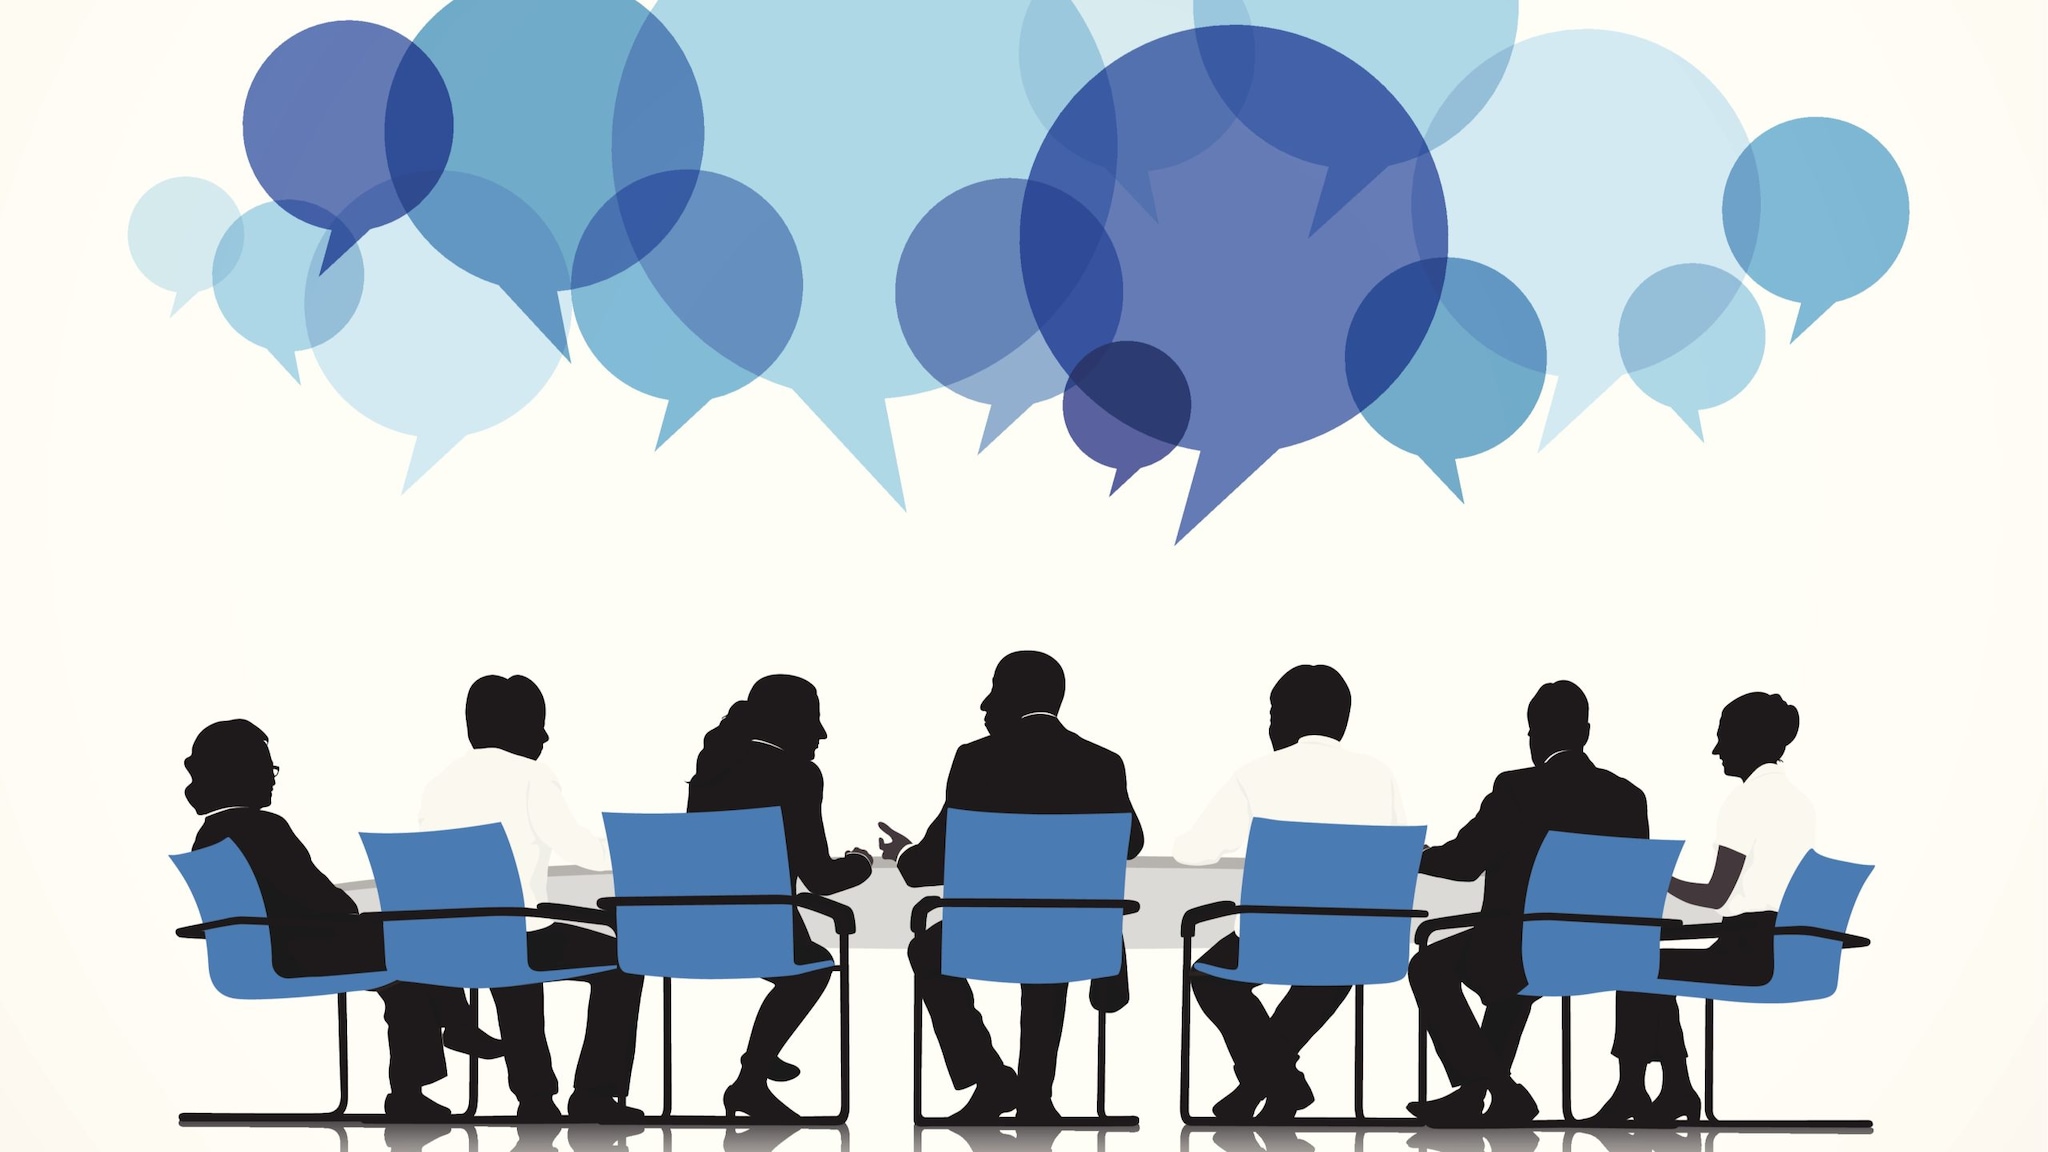 Silhouettes of people sitting at a conference table with speech bubbles above.